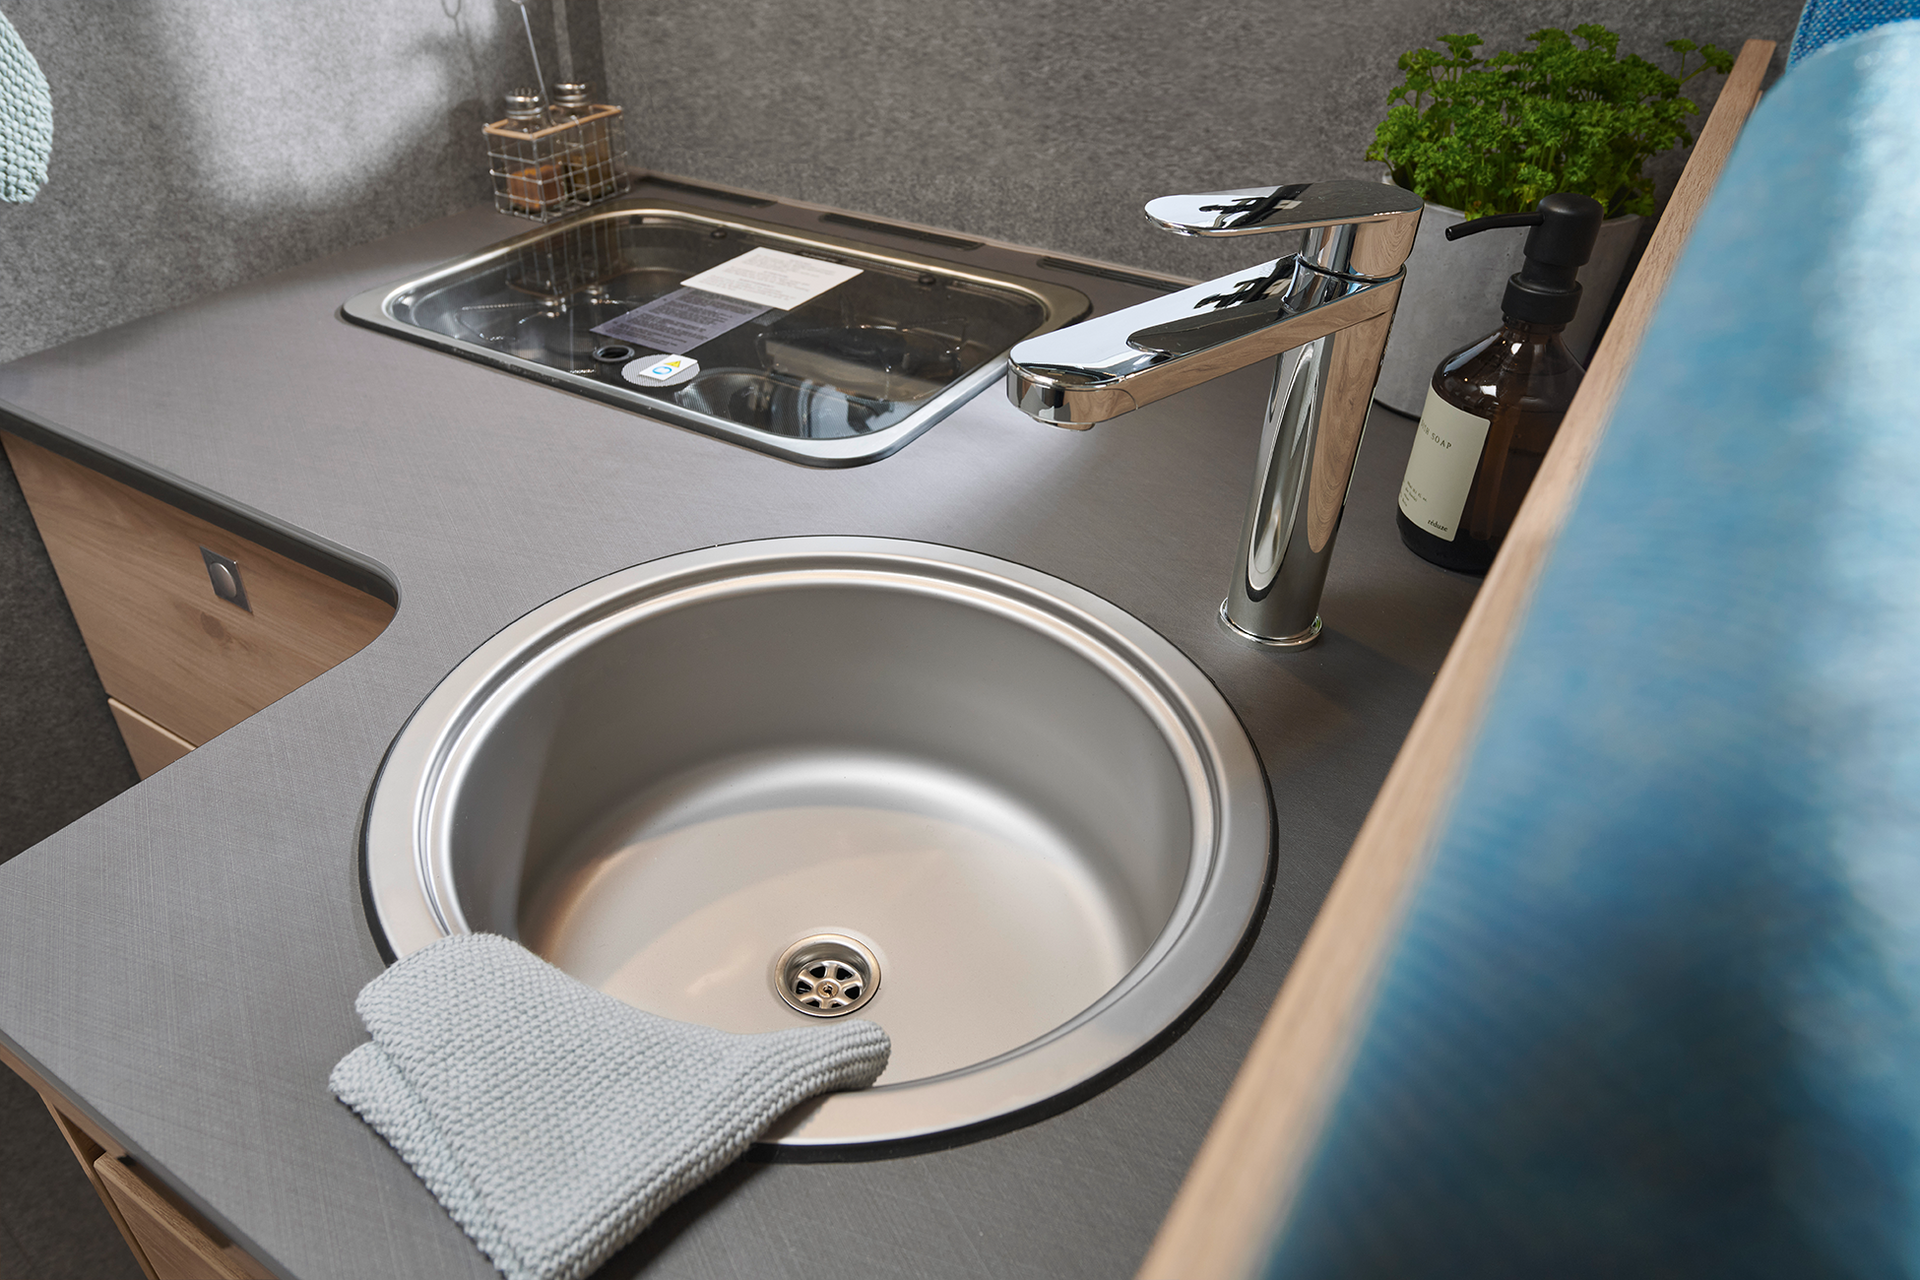 Even large pots and pans can be easily washed in the wide sink with a high tap..